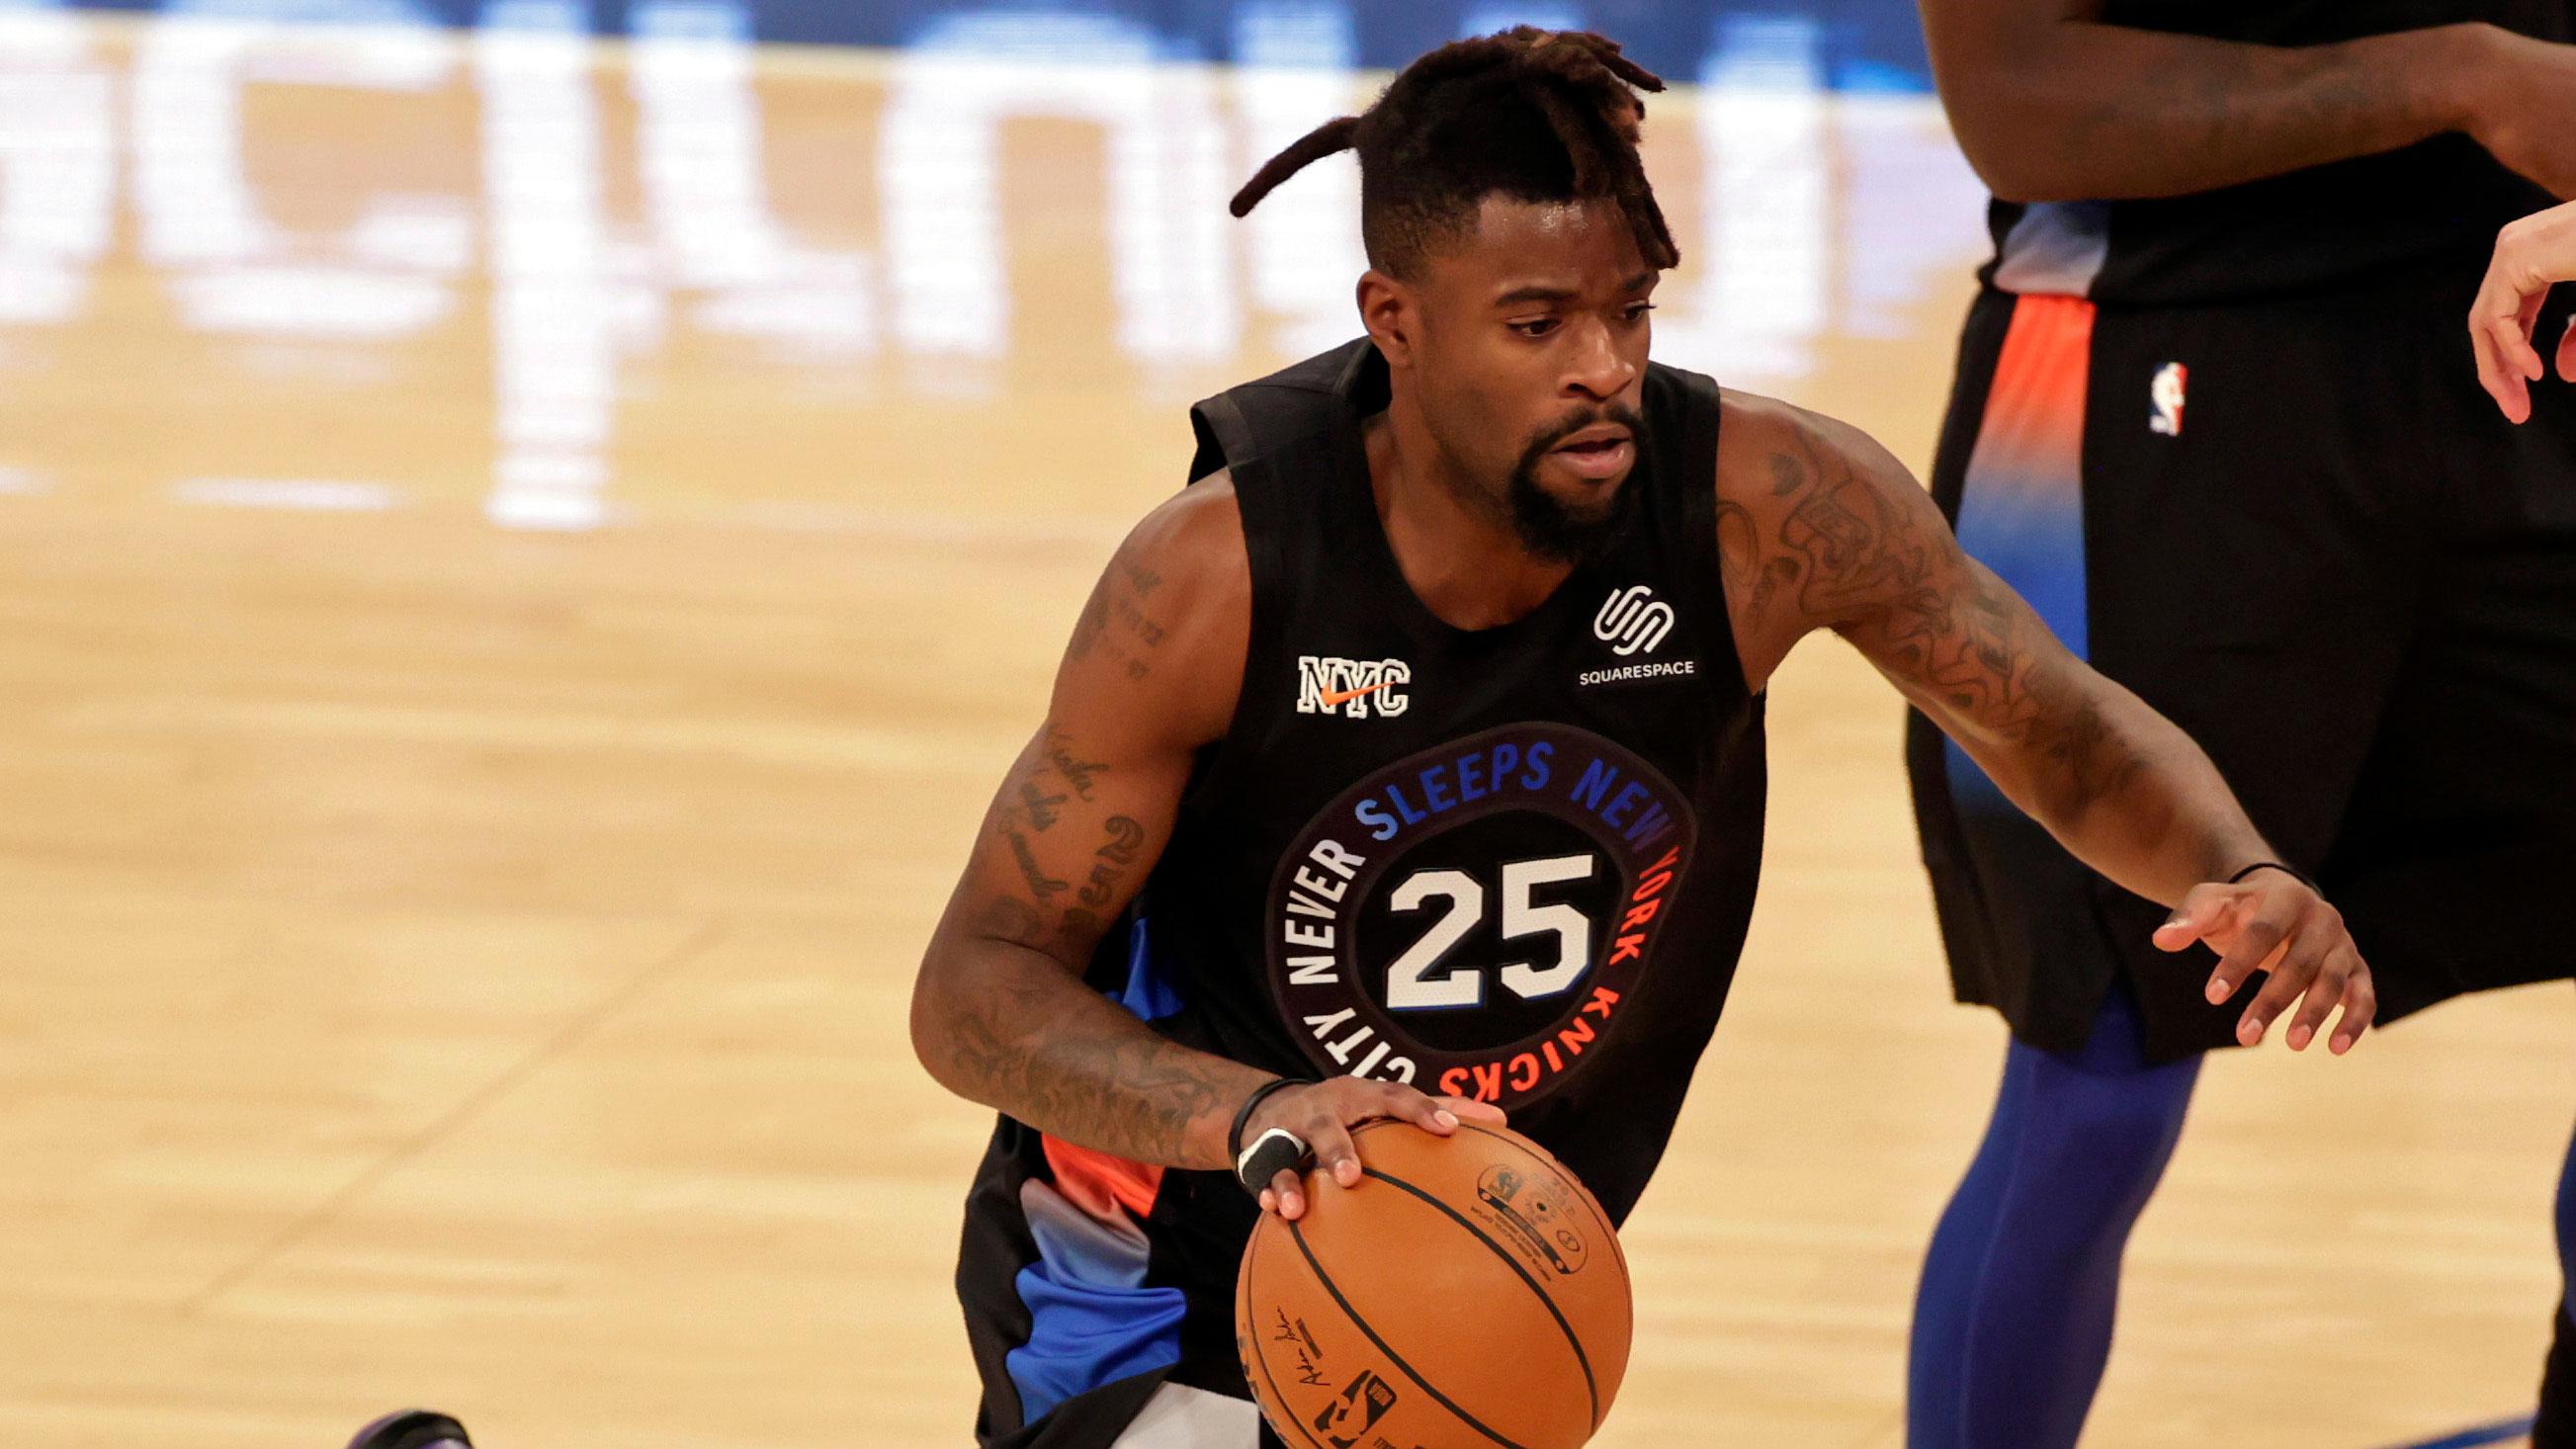 Dec 26, 2020; New York, New York, USA; New York Knicks forward Reggie Bullock in action during the second half of an NBA basketball game against the Philadelphia 76ers on Saturday, Dec. 26, 2020, in New York. The 76ers defeated the Knicks 109-89 at Madison Square Garden / Adam Hunger/Pool Photo-USA TODAY Sports